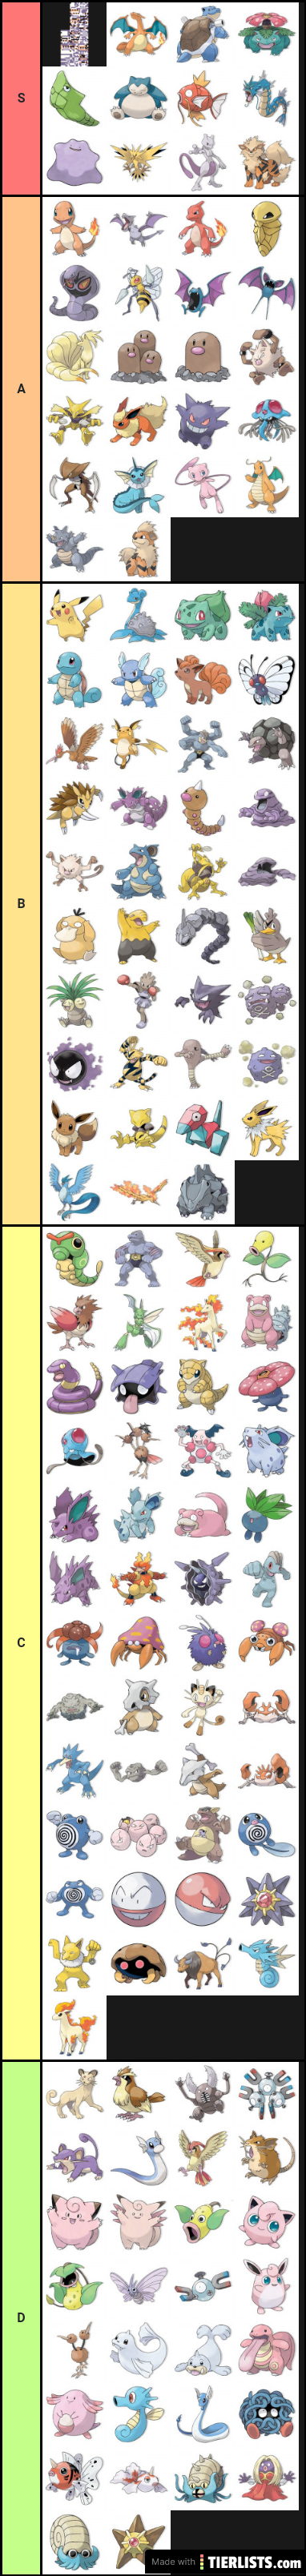 Best Pokemon tier list out here